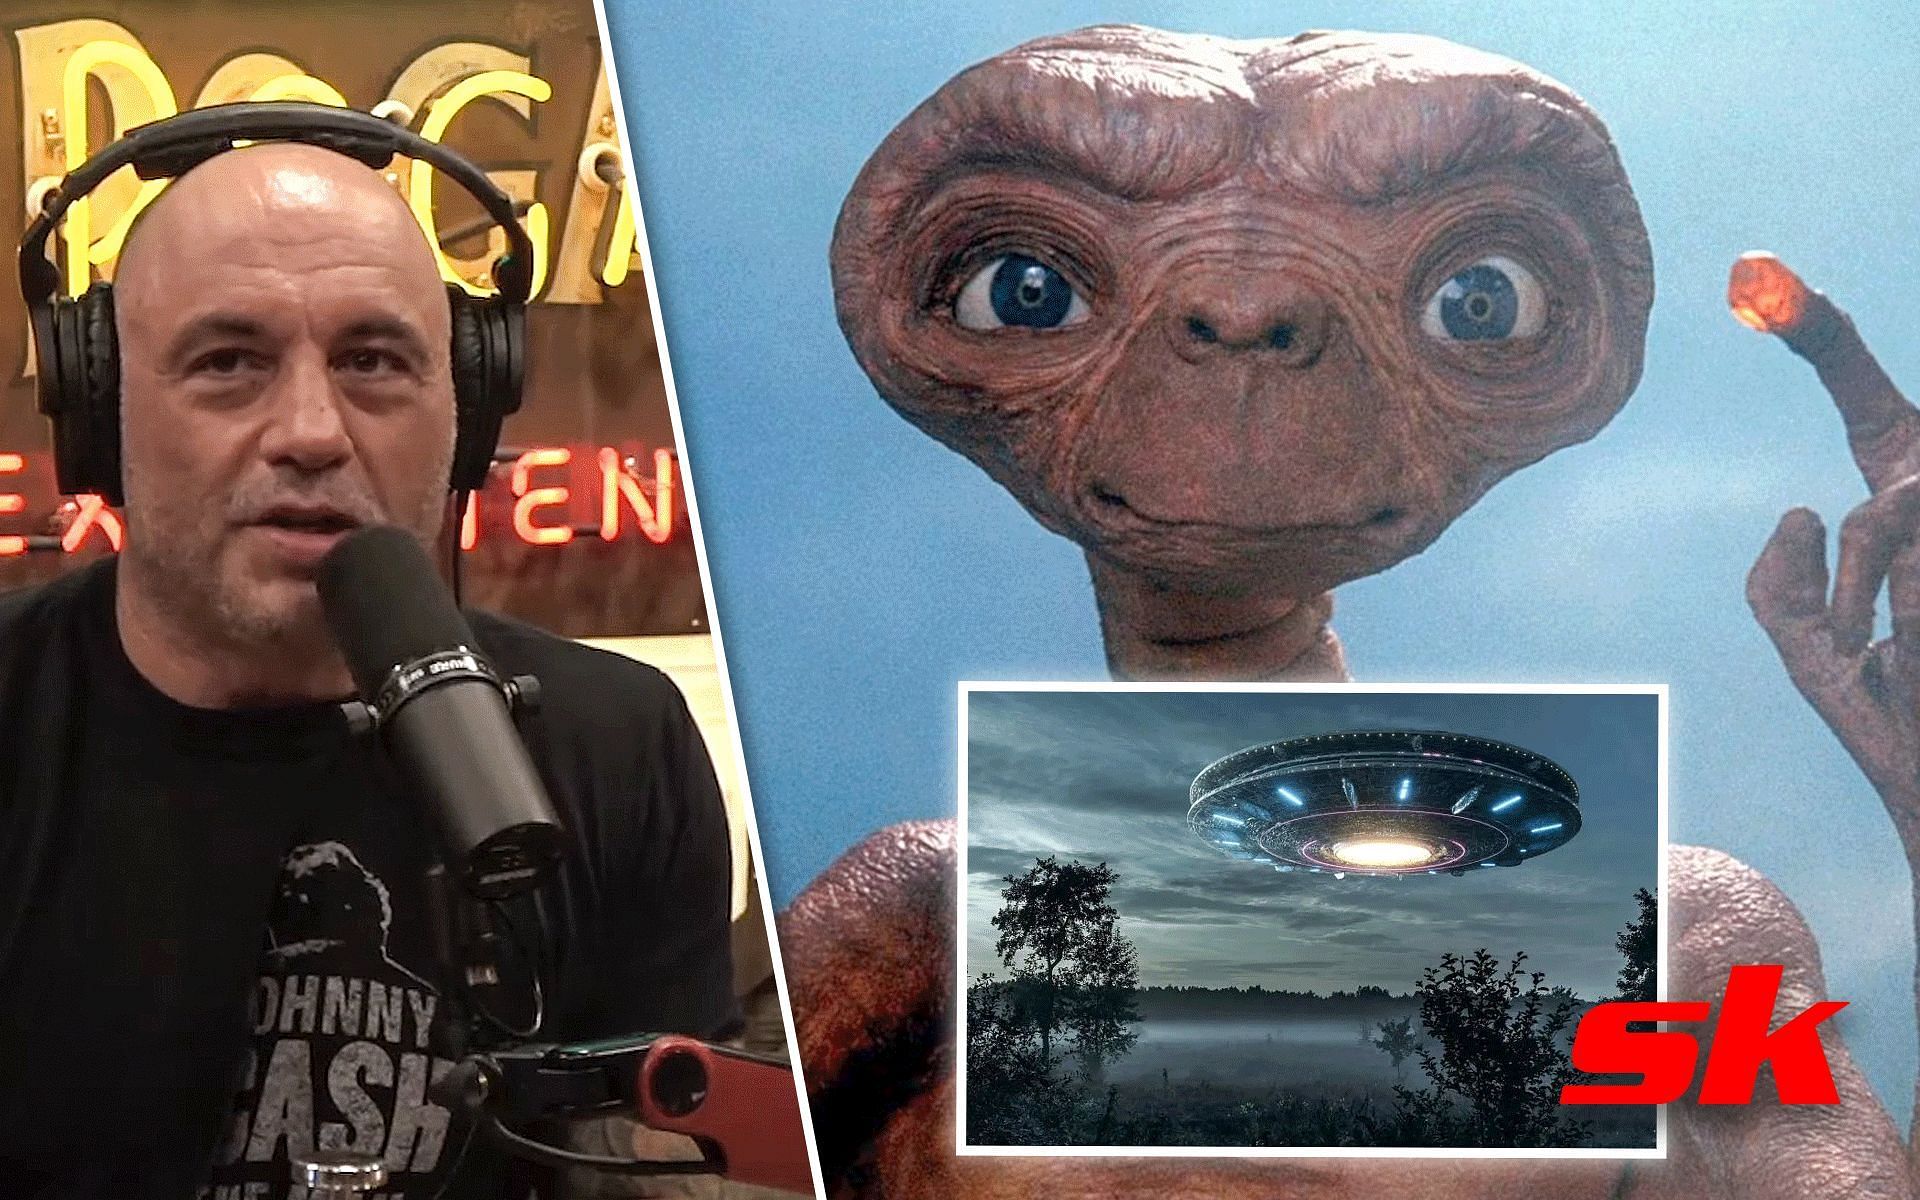 Joe Rogan has a theory on extraterrestrials [Photo credit: collider.com and scitechdaily.com]